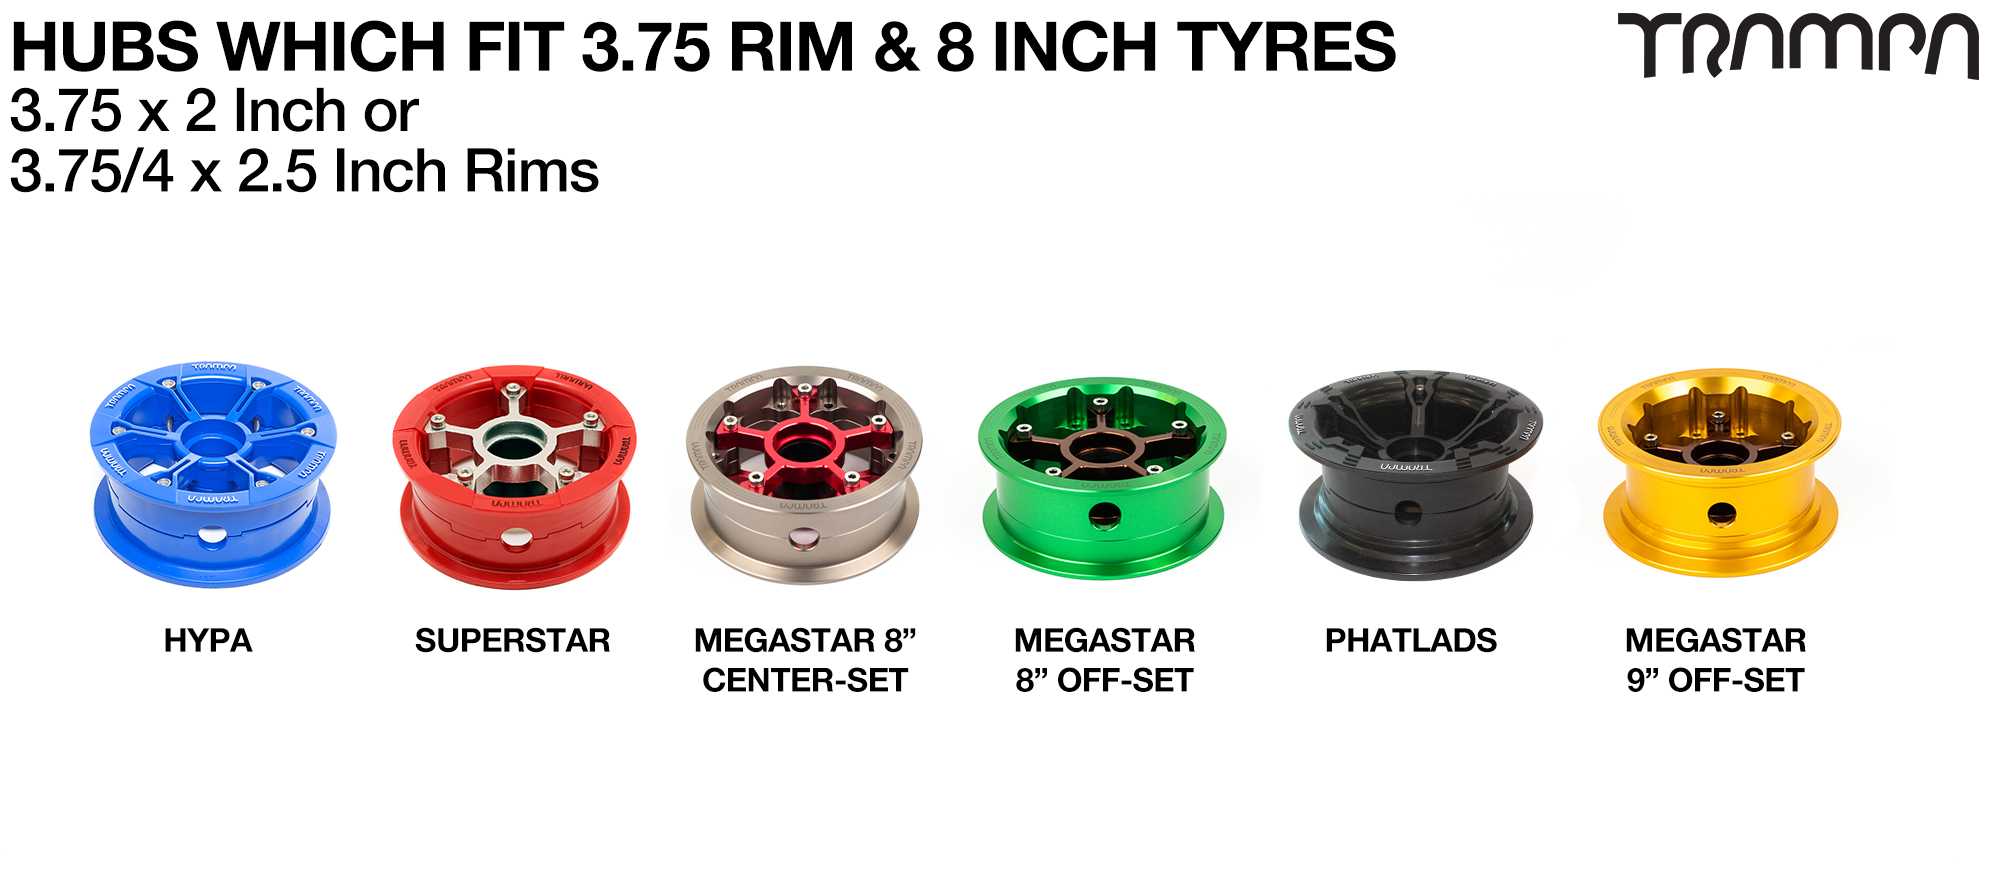 TRAMPA MUD-PLUGGER 8 Inch Tyre measure 3.75x 2x 8 Inch or 200x50mm with 3.75 inch Rim fits all 3.75 inch Hubs